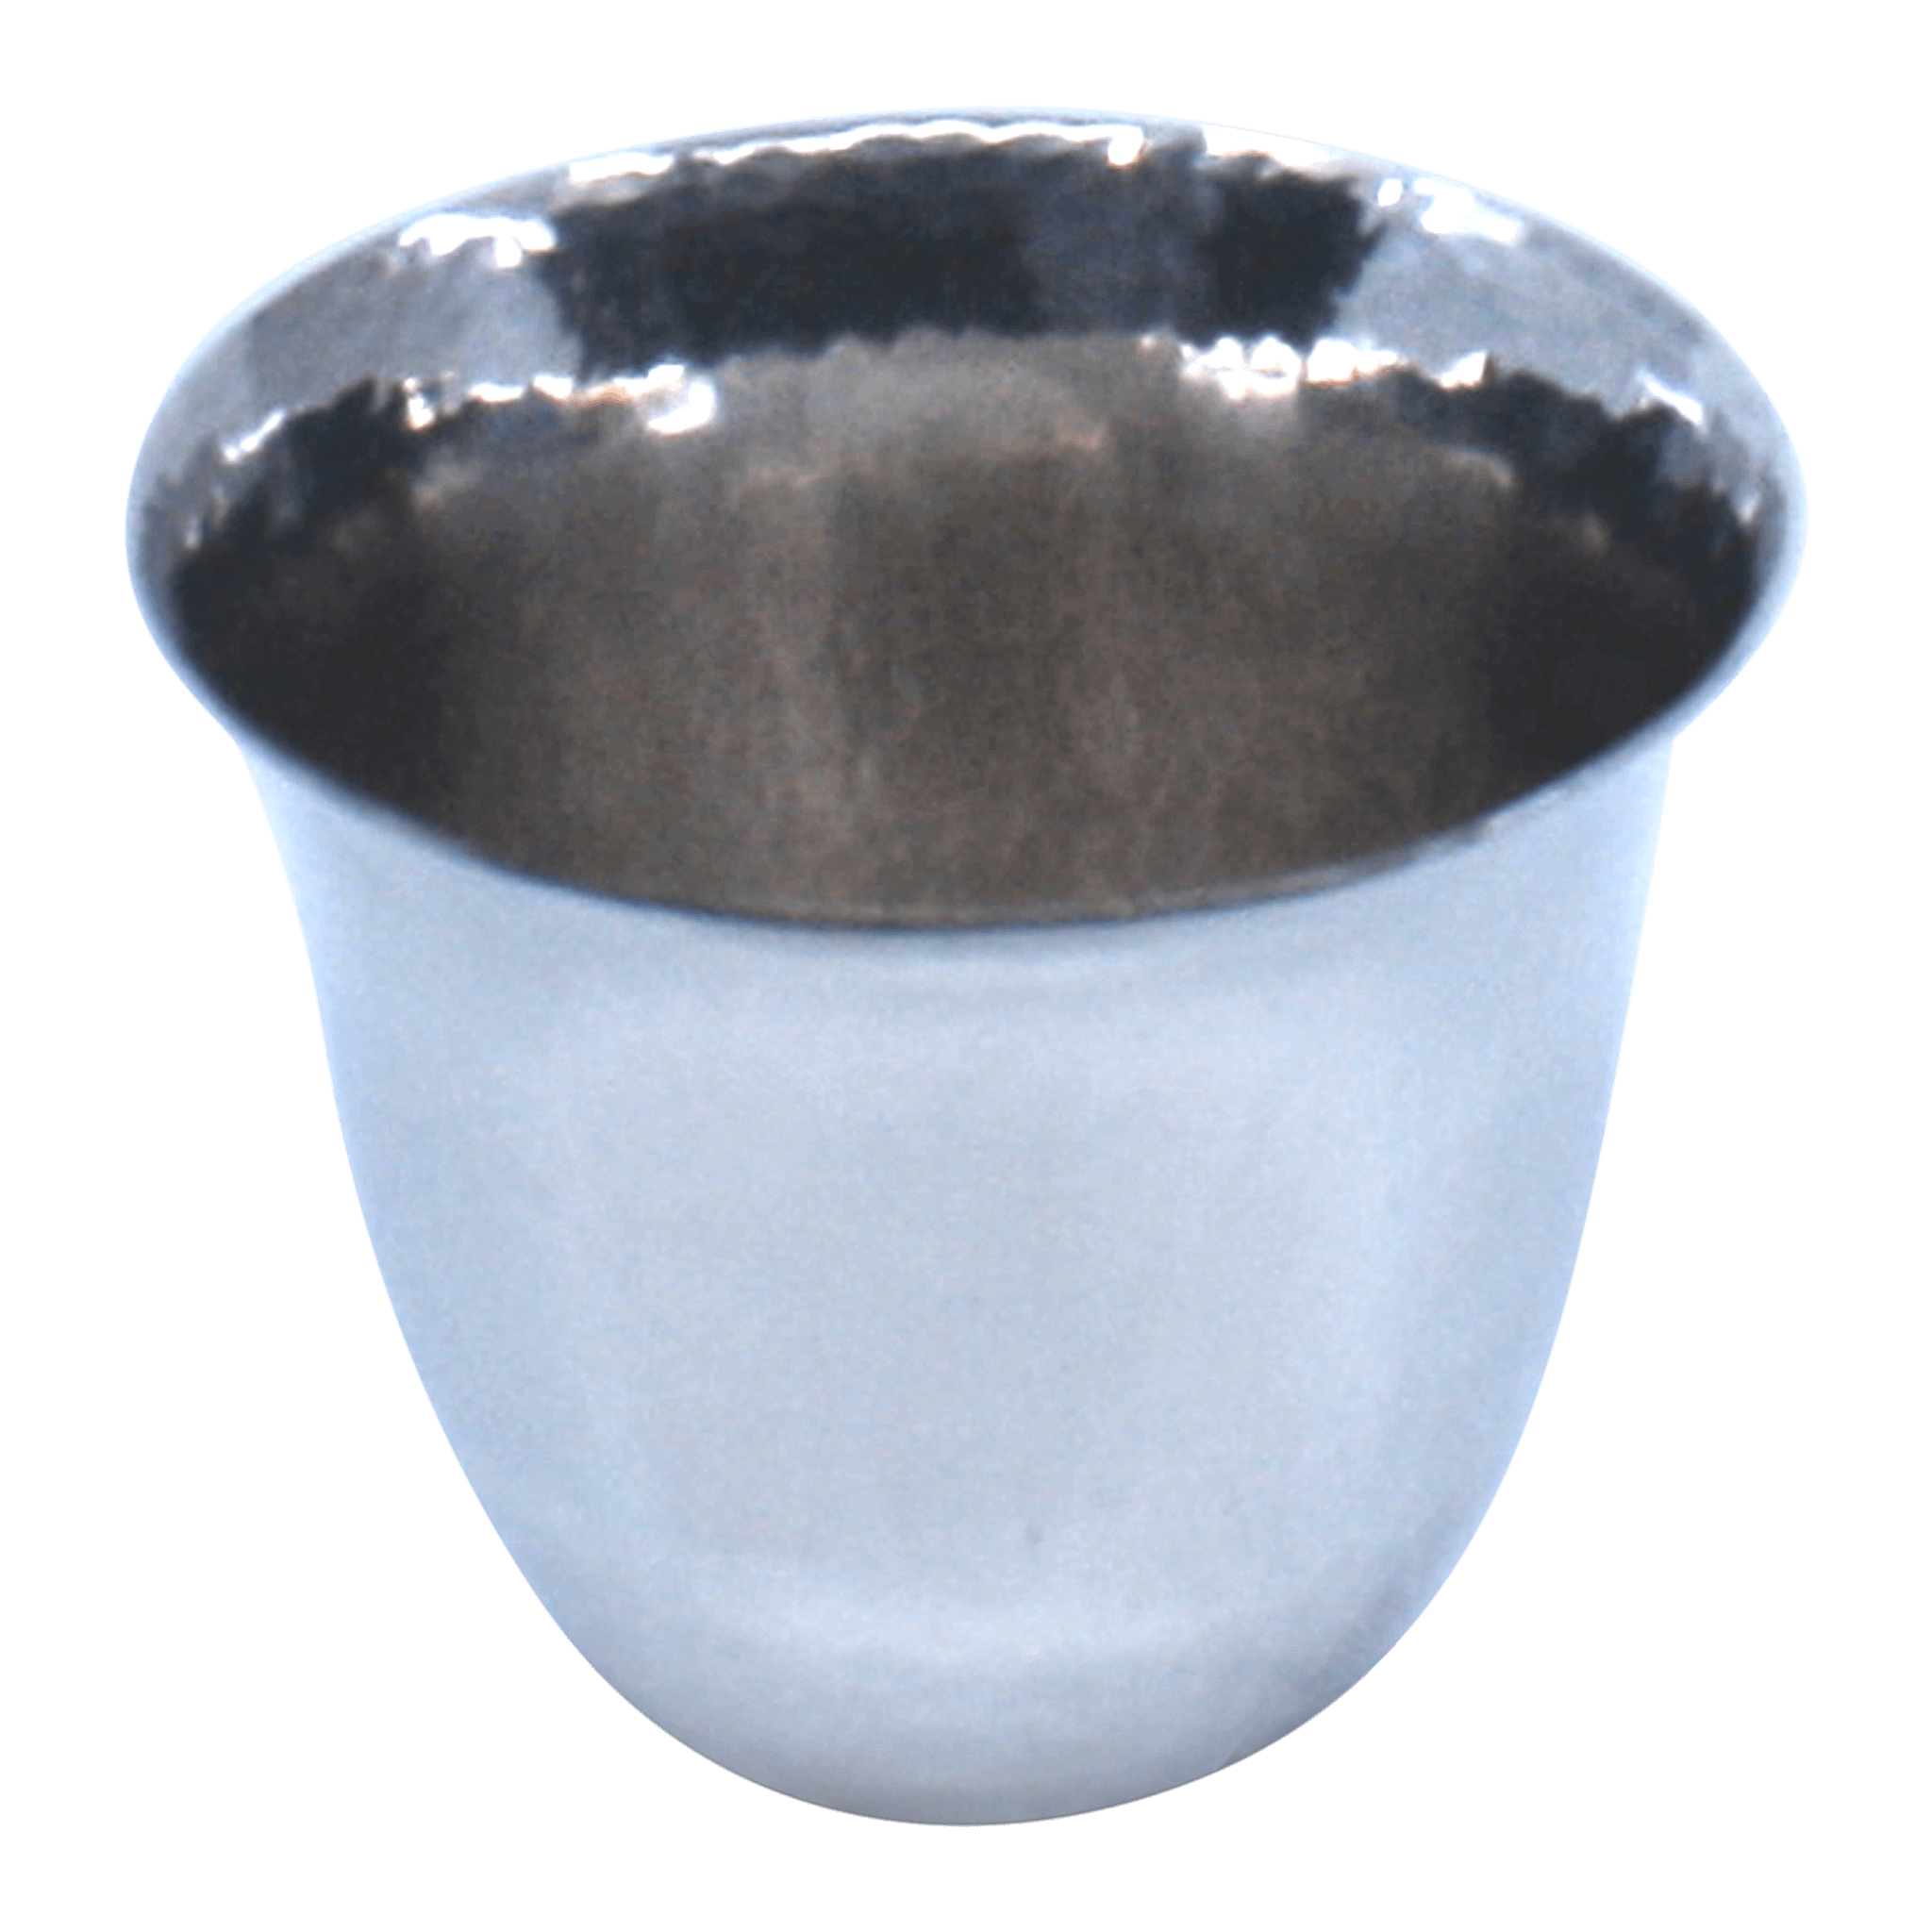 ITALIAN STERLING SILVER KIDDUSH CUP at $510.00 - Piece By Zion Hadad